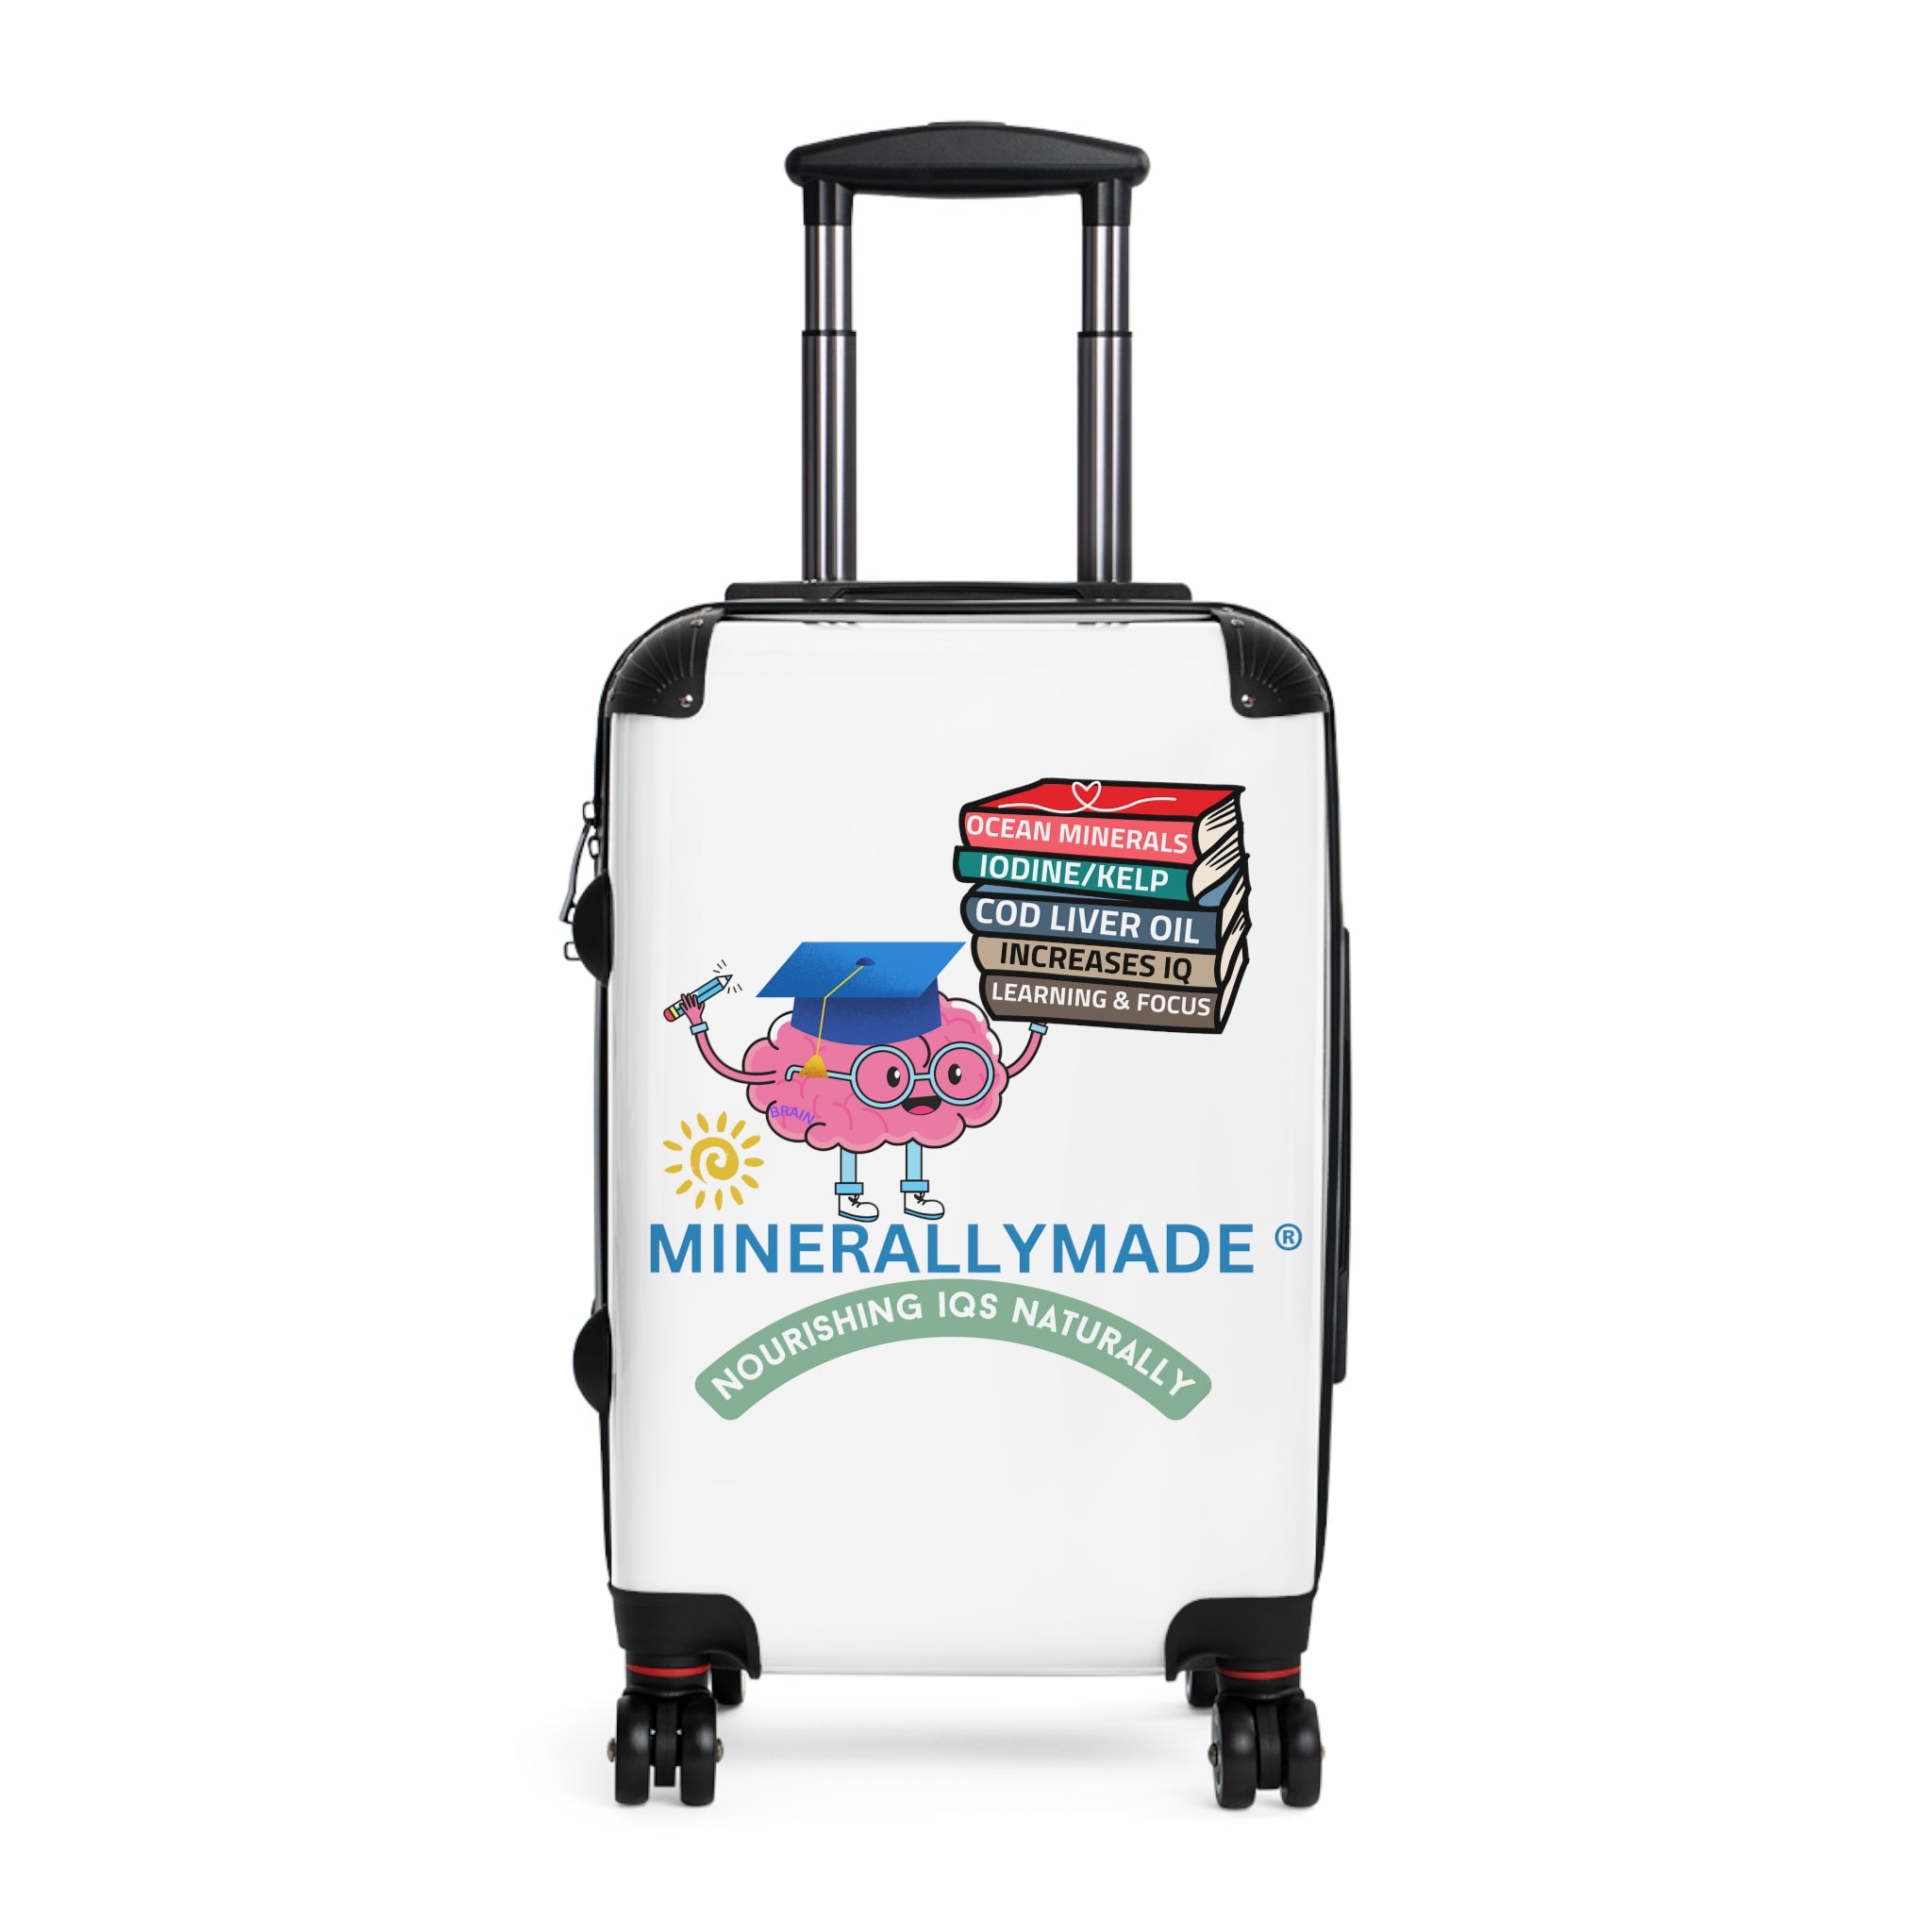 Minerallymade | Nourishing IQs Naturally | Suitcases (3 Sizes - S, M, L)